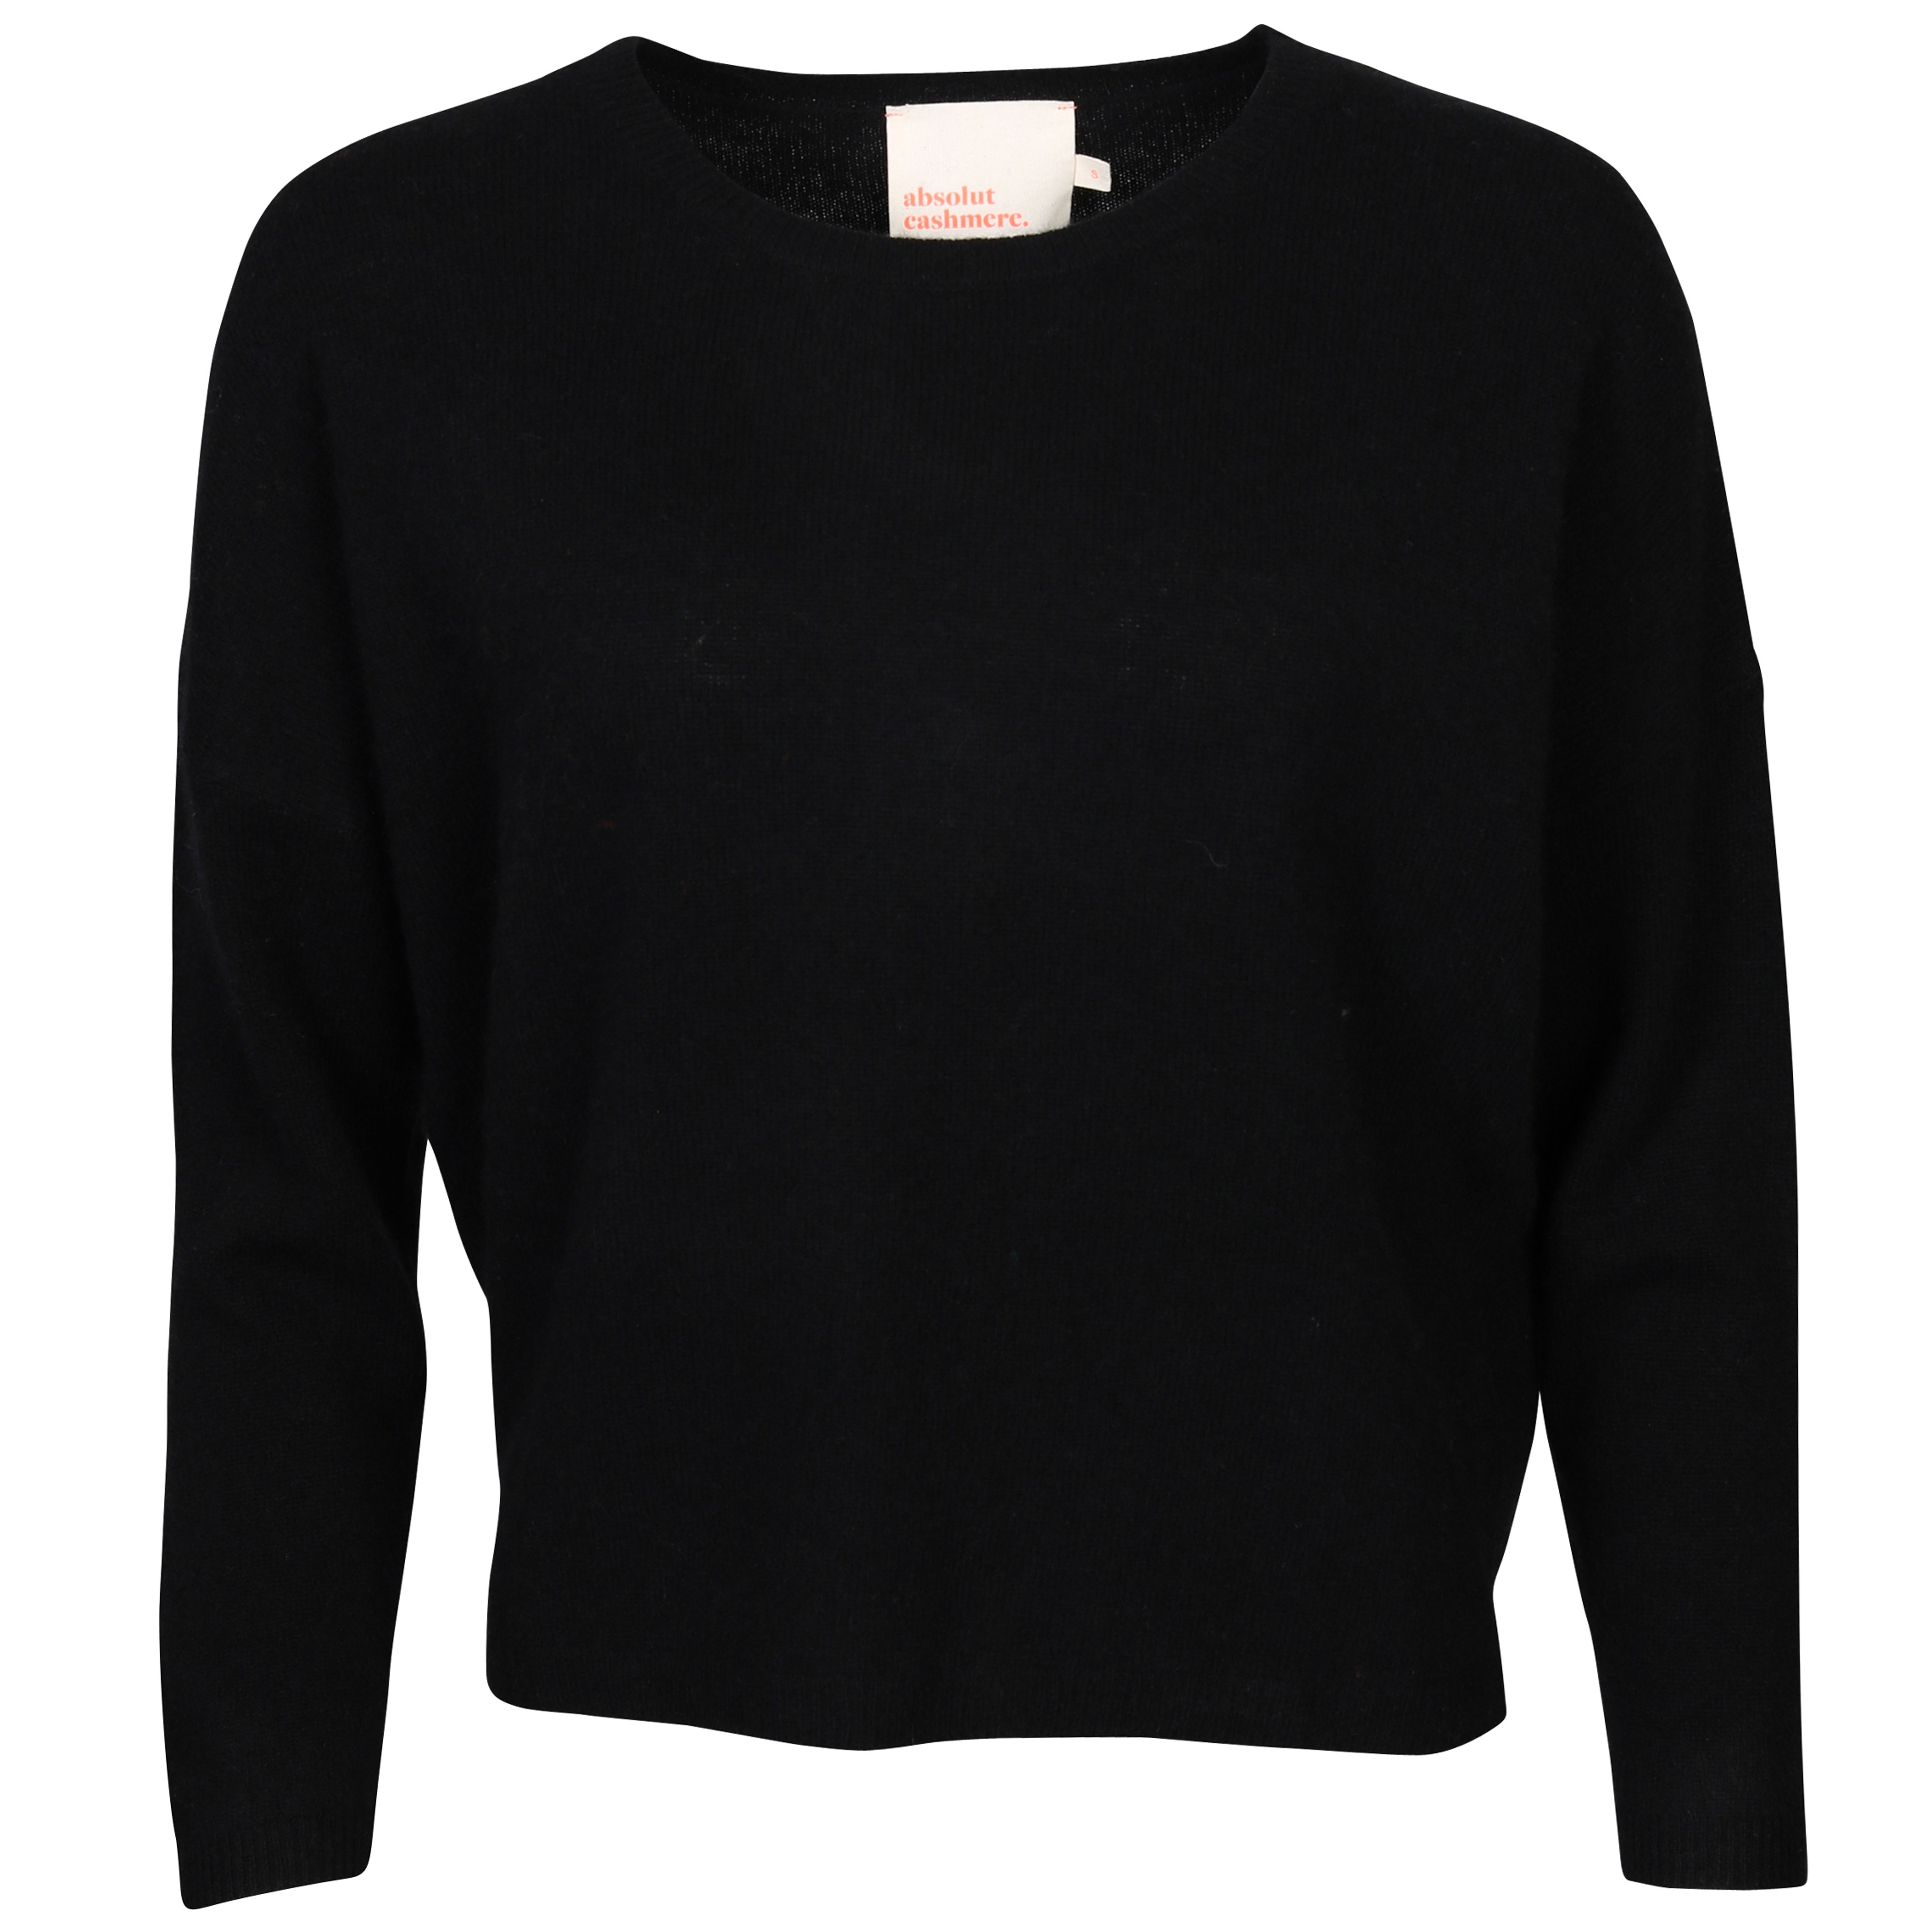 Absolut Cashmere Kaira Cashmere Pullover in Noir XS